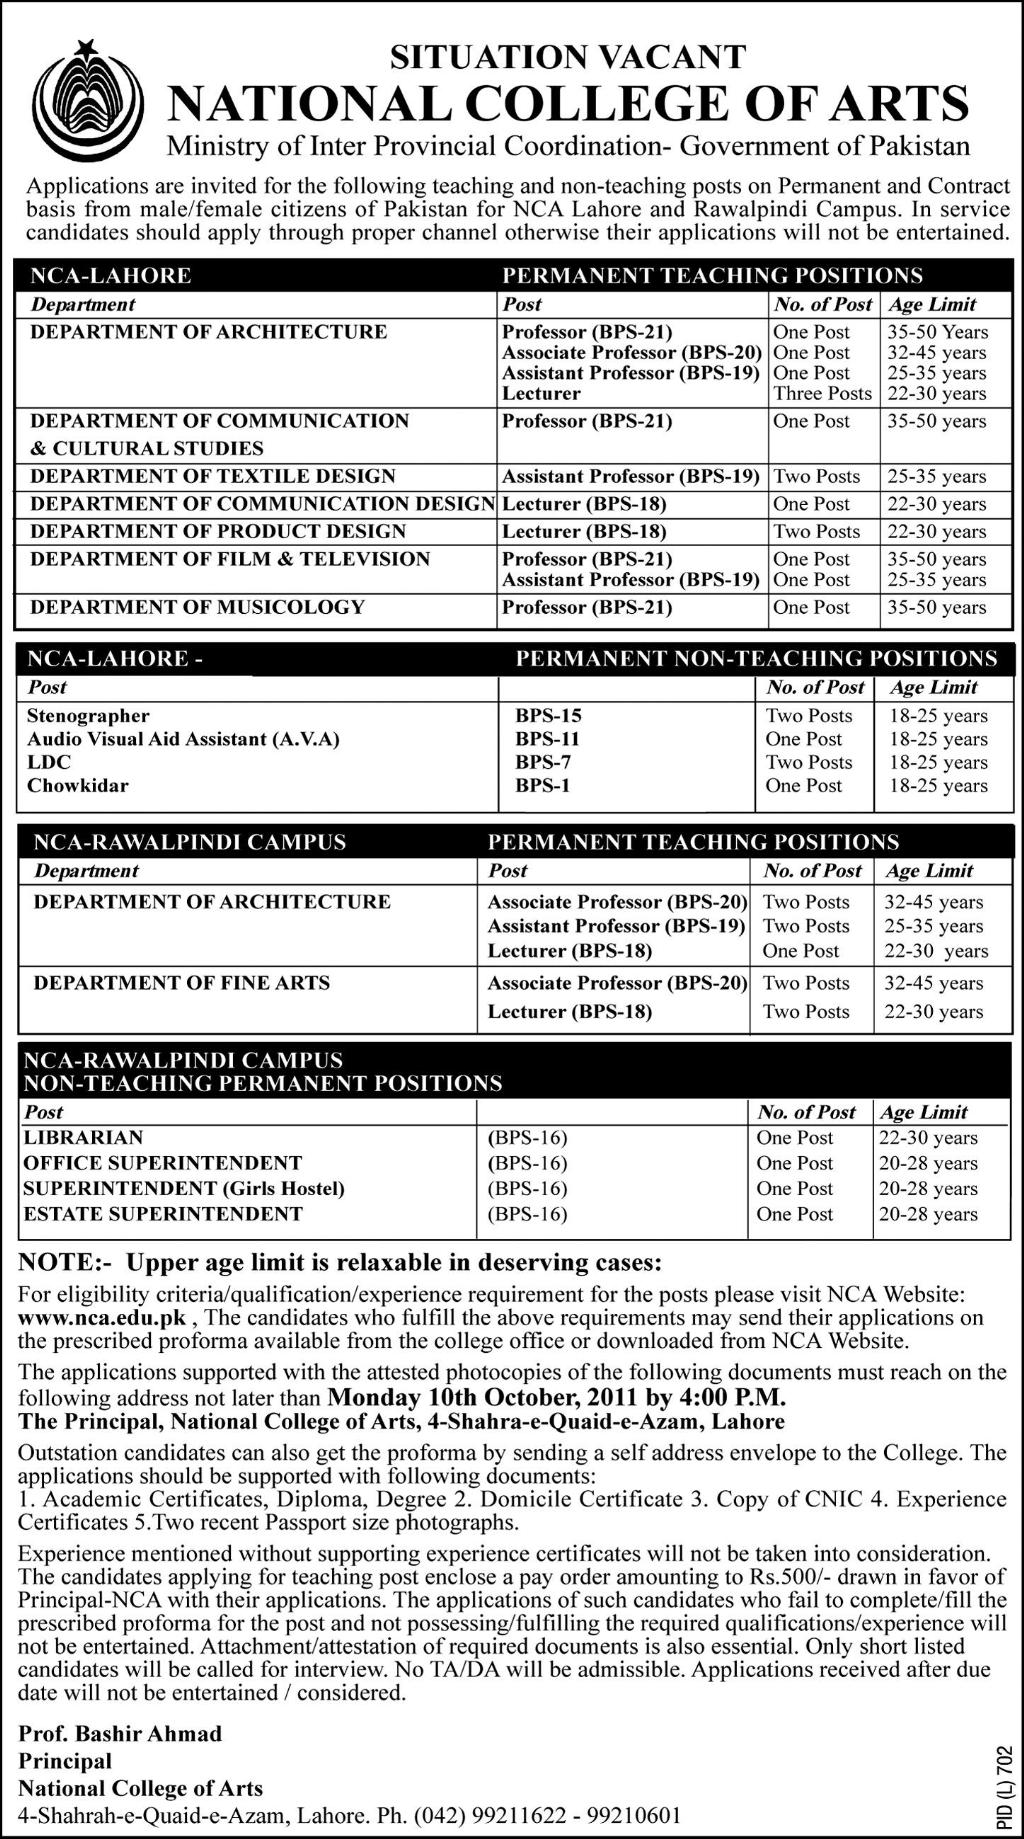 Faculty and Admin Staff Required by National College of Arts